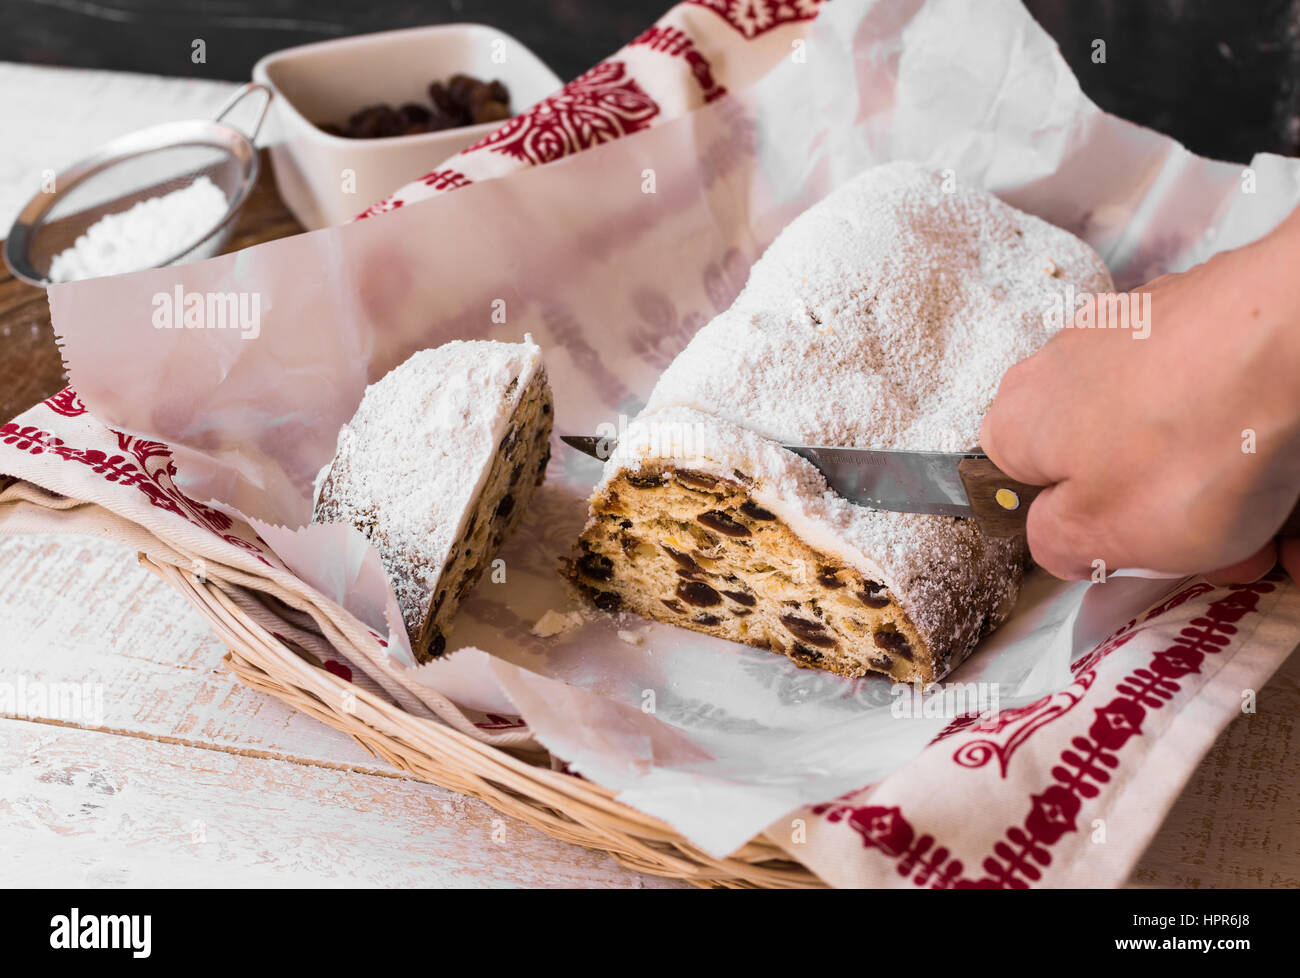 Woman's hand cutting off slice of powdered Christmas stollen on parchment paper, wicker basket, kitchen towel, ingredients, rustic kitchen interior Stock Photo